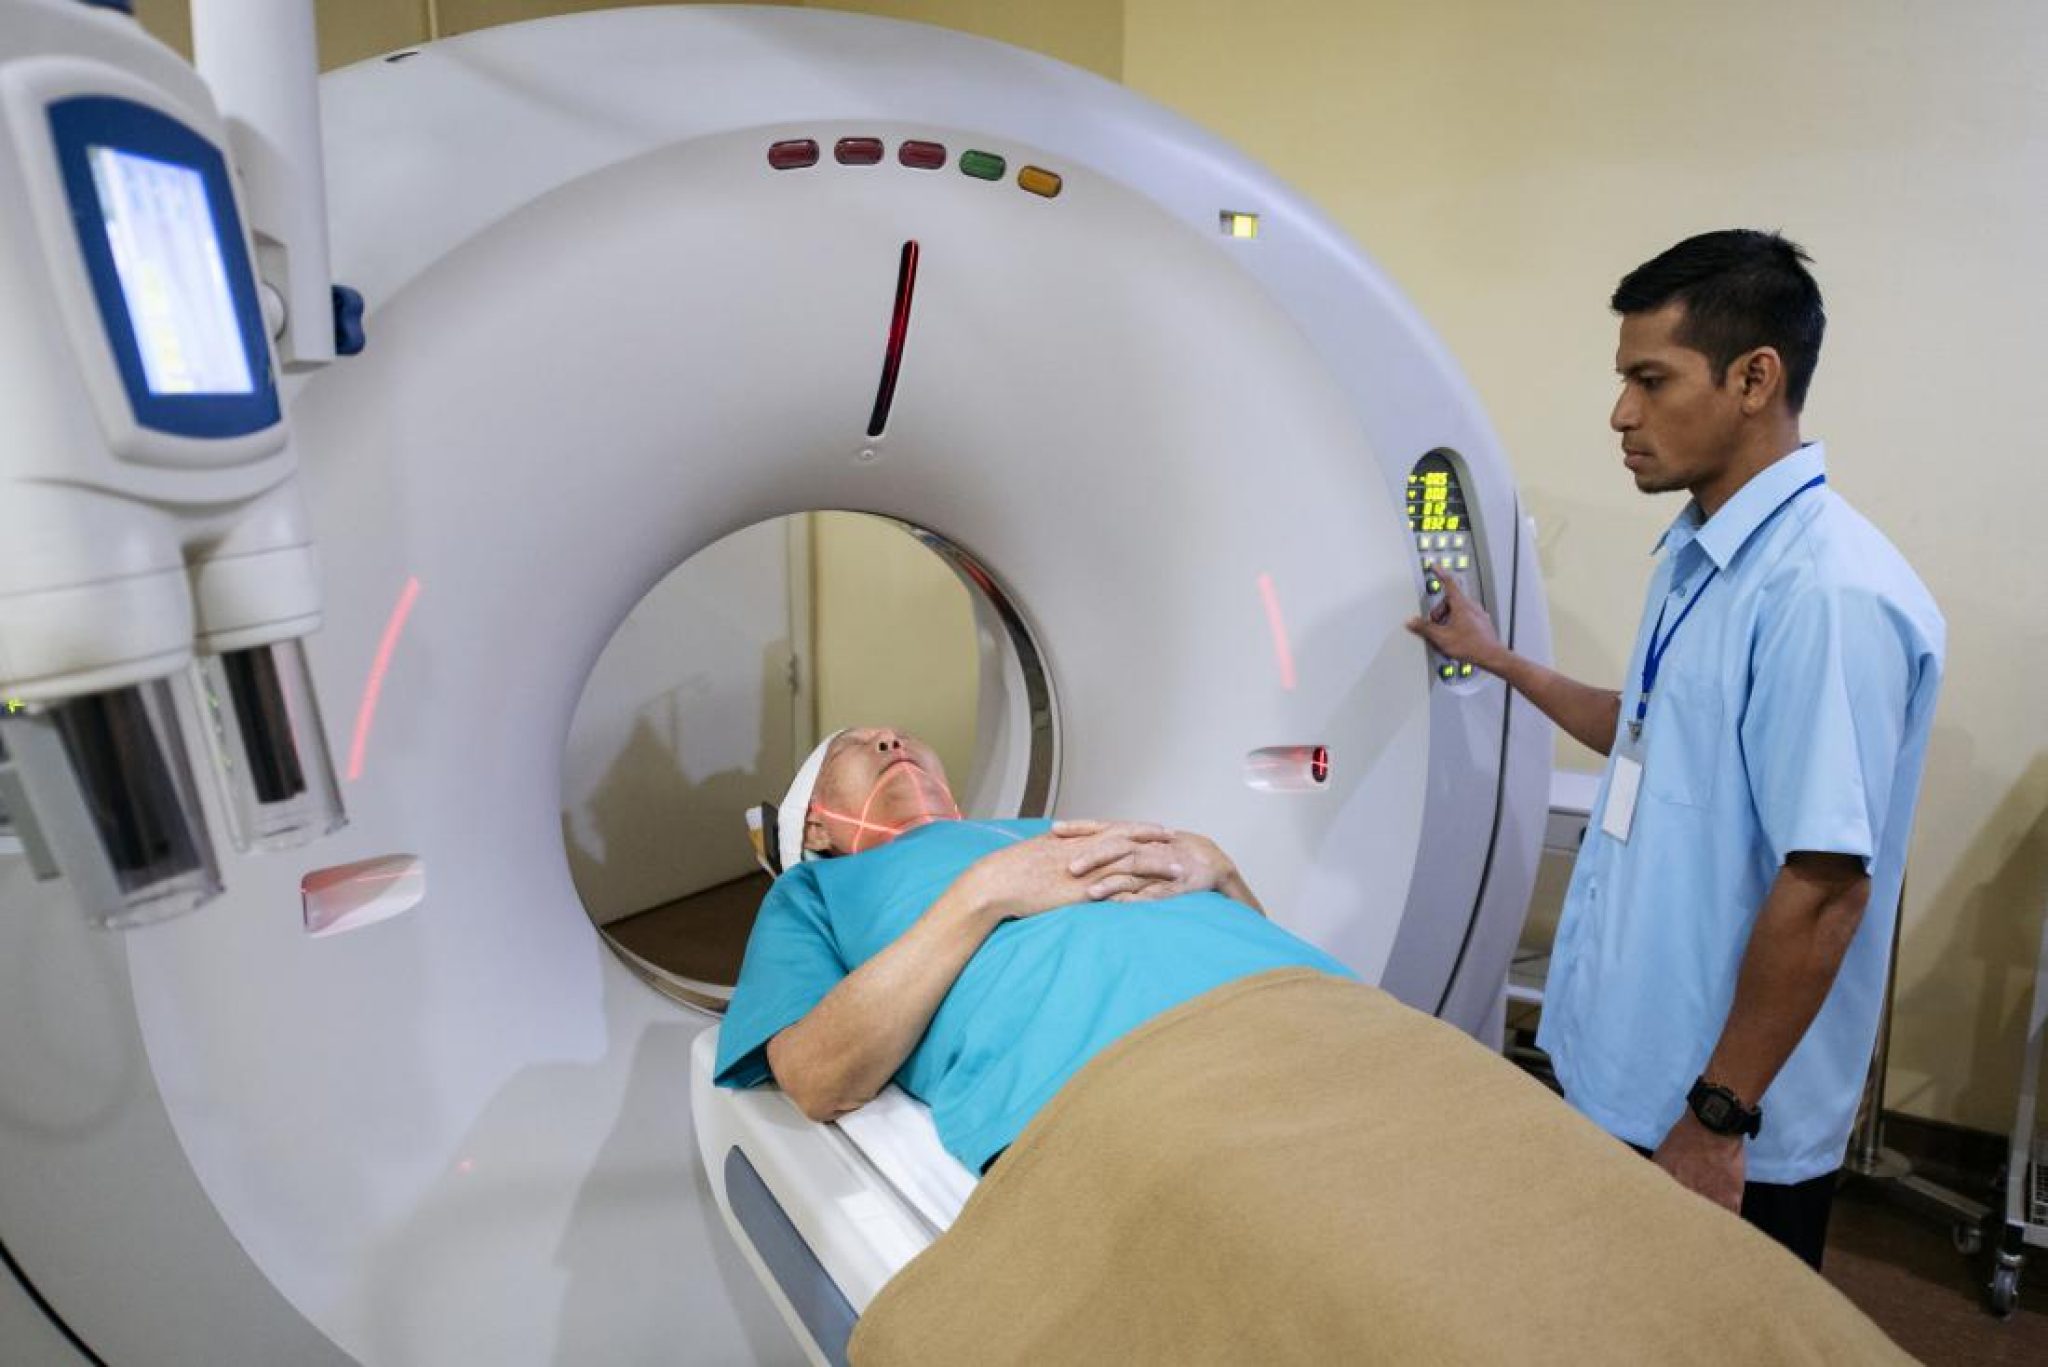 Key Differences Between Mri And Ct Scan Mri Vs Ct Scan Outlet119